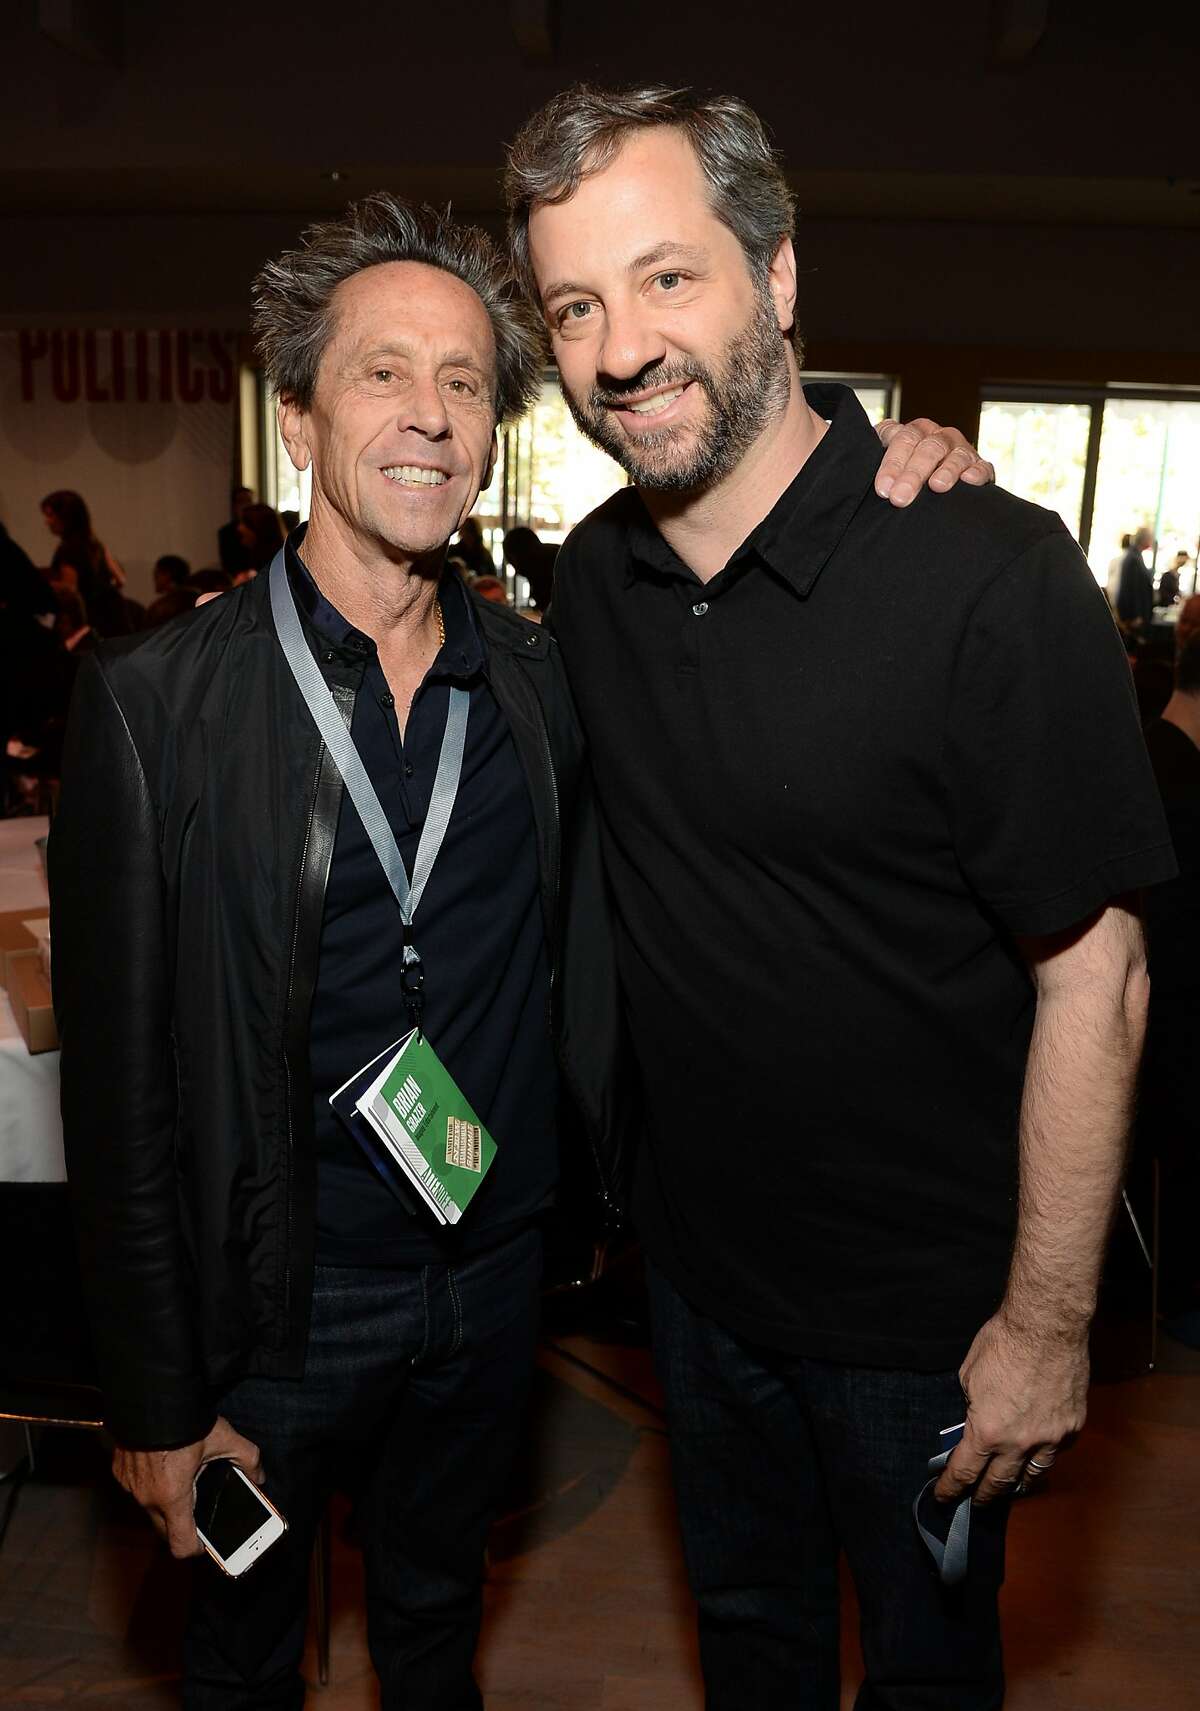 SAN FRANCISCO, CA - OCTOBER 08: Imagine Entertainment Co-founder Brian Grazer and filmmaker Judd Apatow attend the Vanity Fair New Establishment Summit at Yerba Buena Center for the Arts on October 8, 2014 in San Francisco, California. (Photo by Michael Kovac/Getty Images for Vanity Fair)